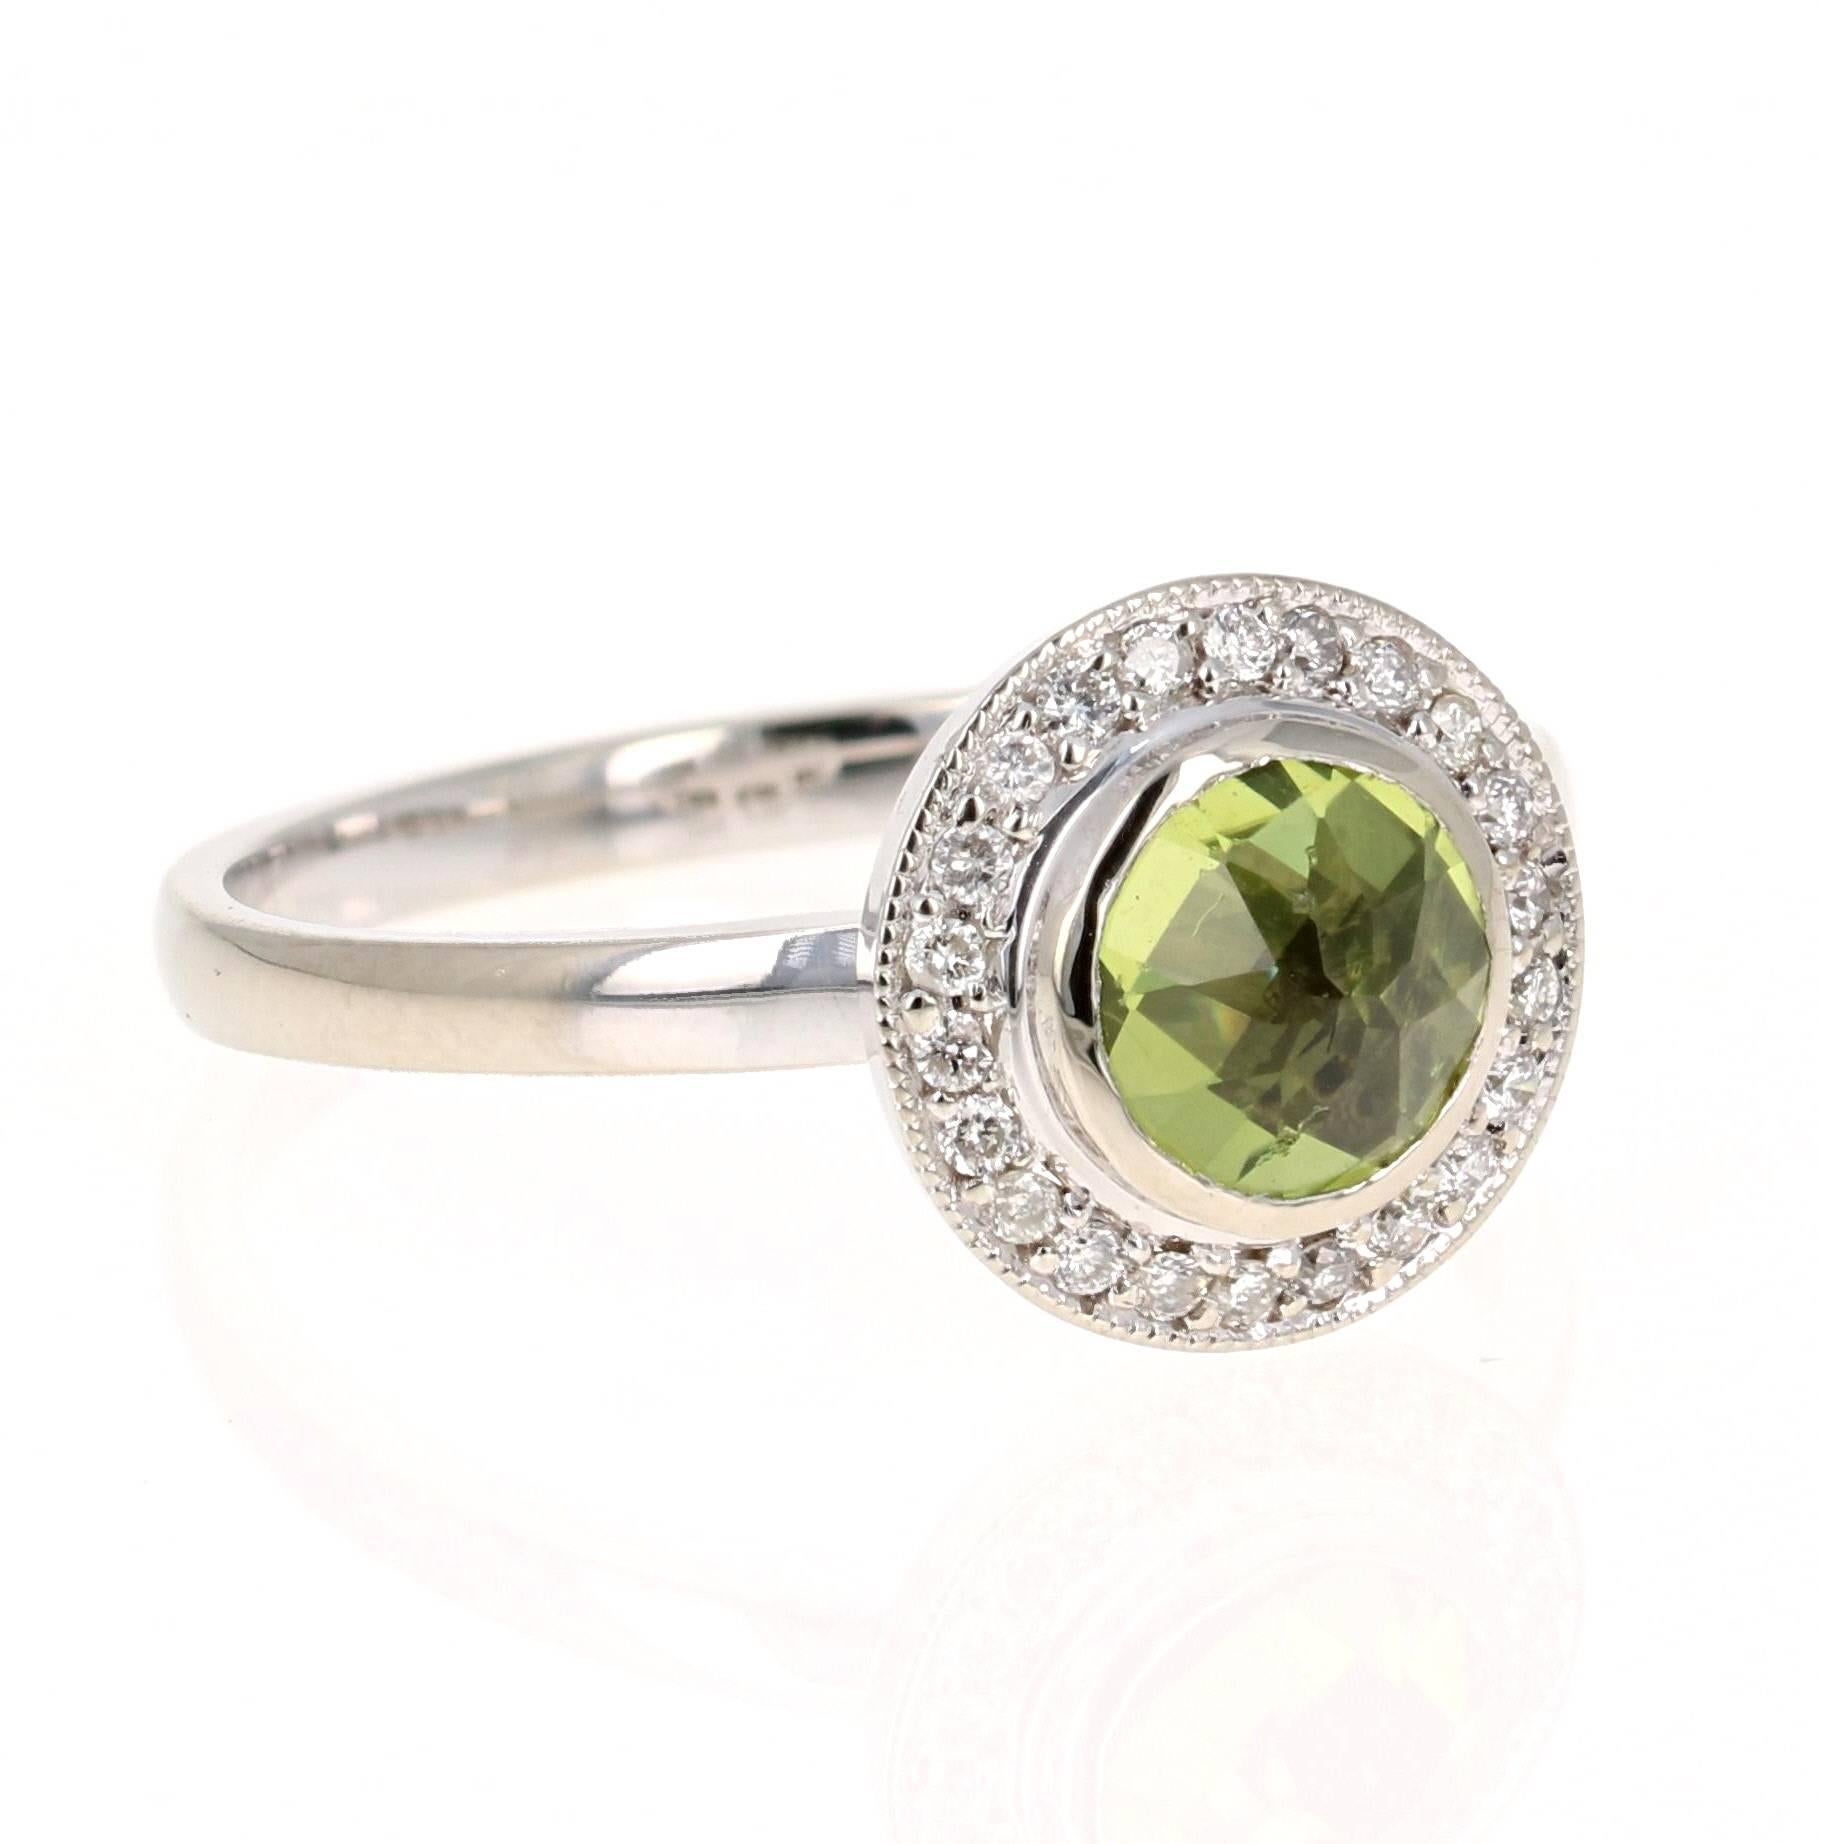 This beautiful ring has a Round Cut Peridot in the center that weighs 0.89 carats. The ring is surrounded by a cute halo of 22 Round Cut Diamonds that weigh 0.14 carats. The total carat weight of the ring is 1.03 carats. The setting is crafted in